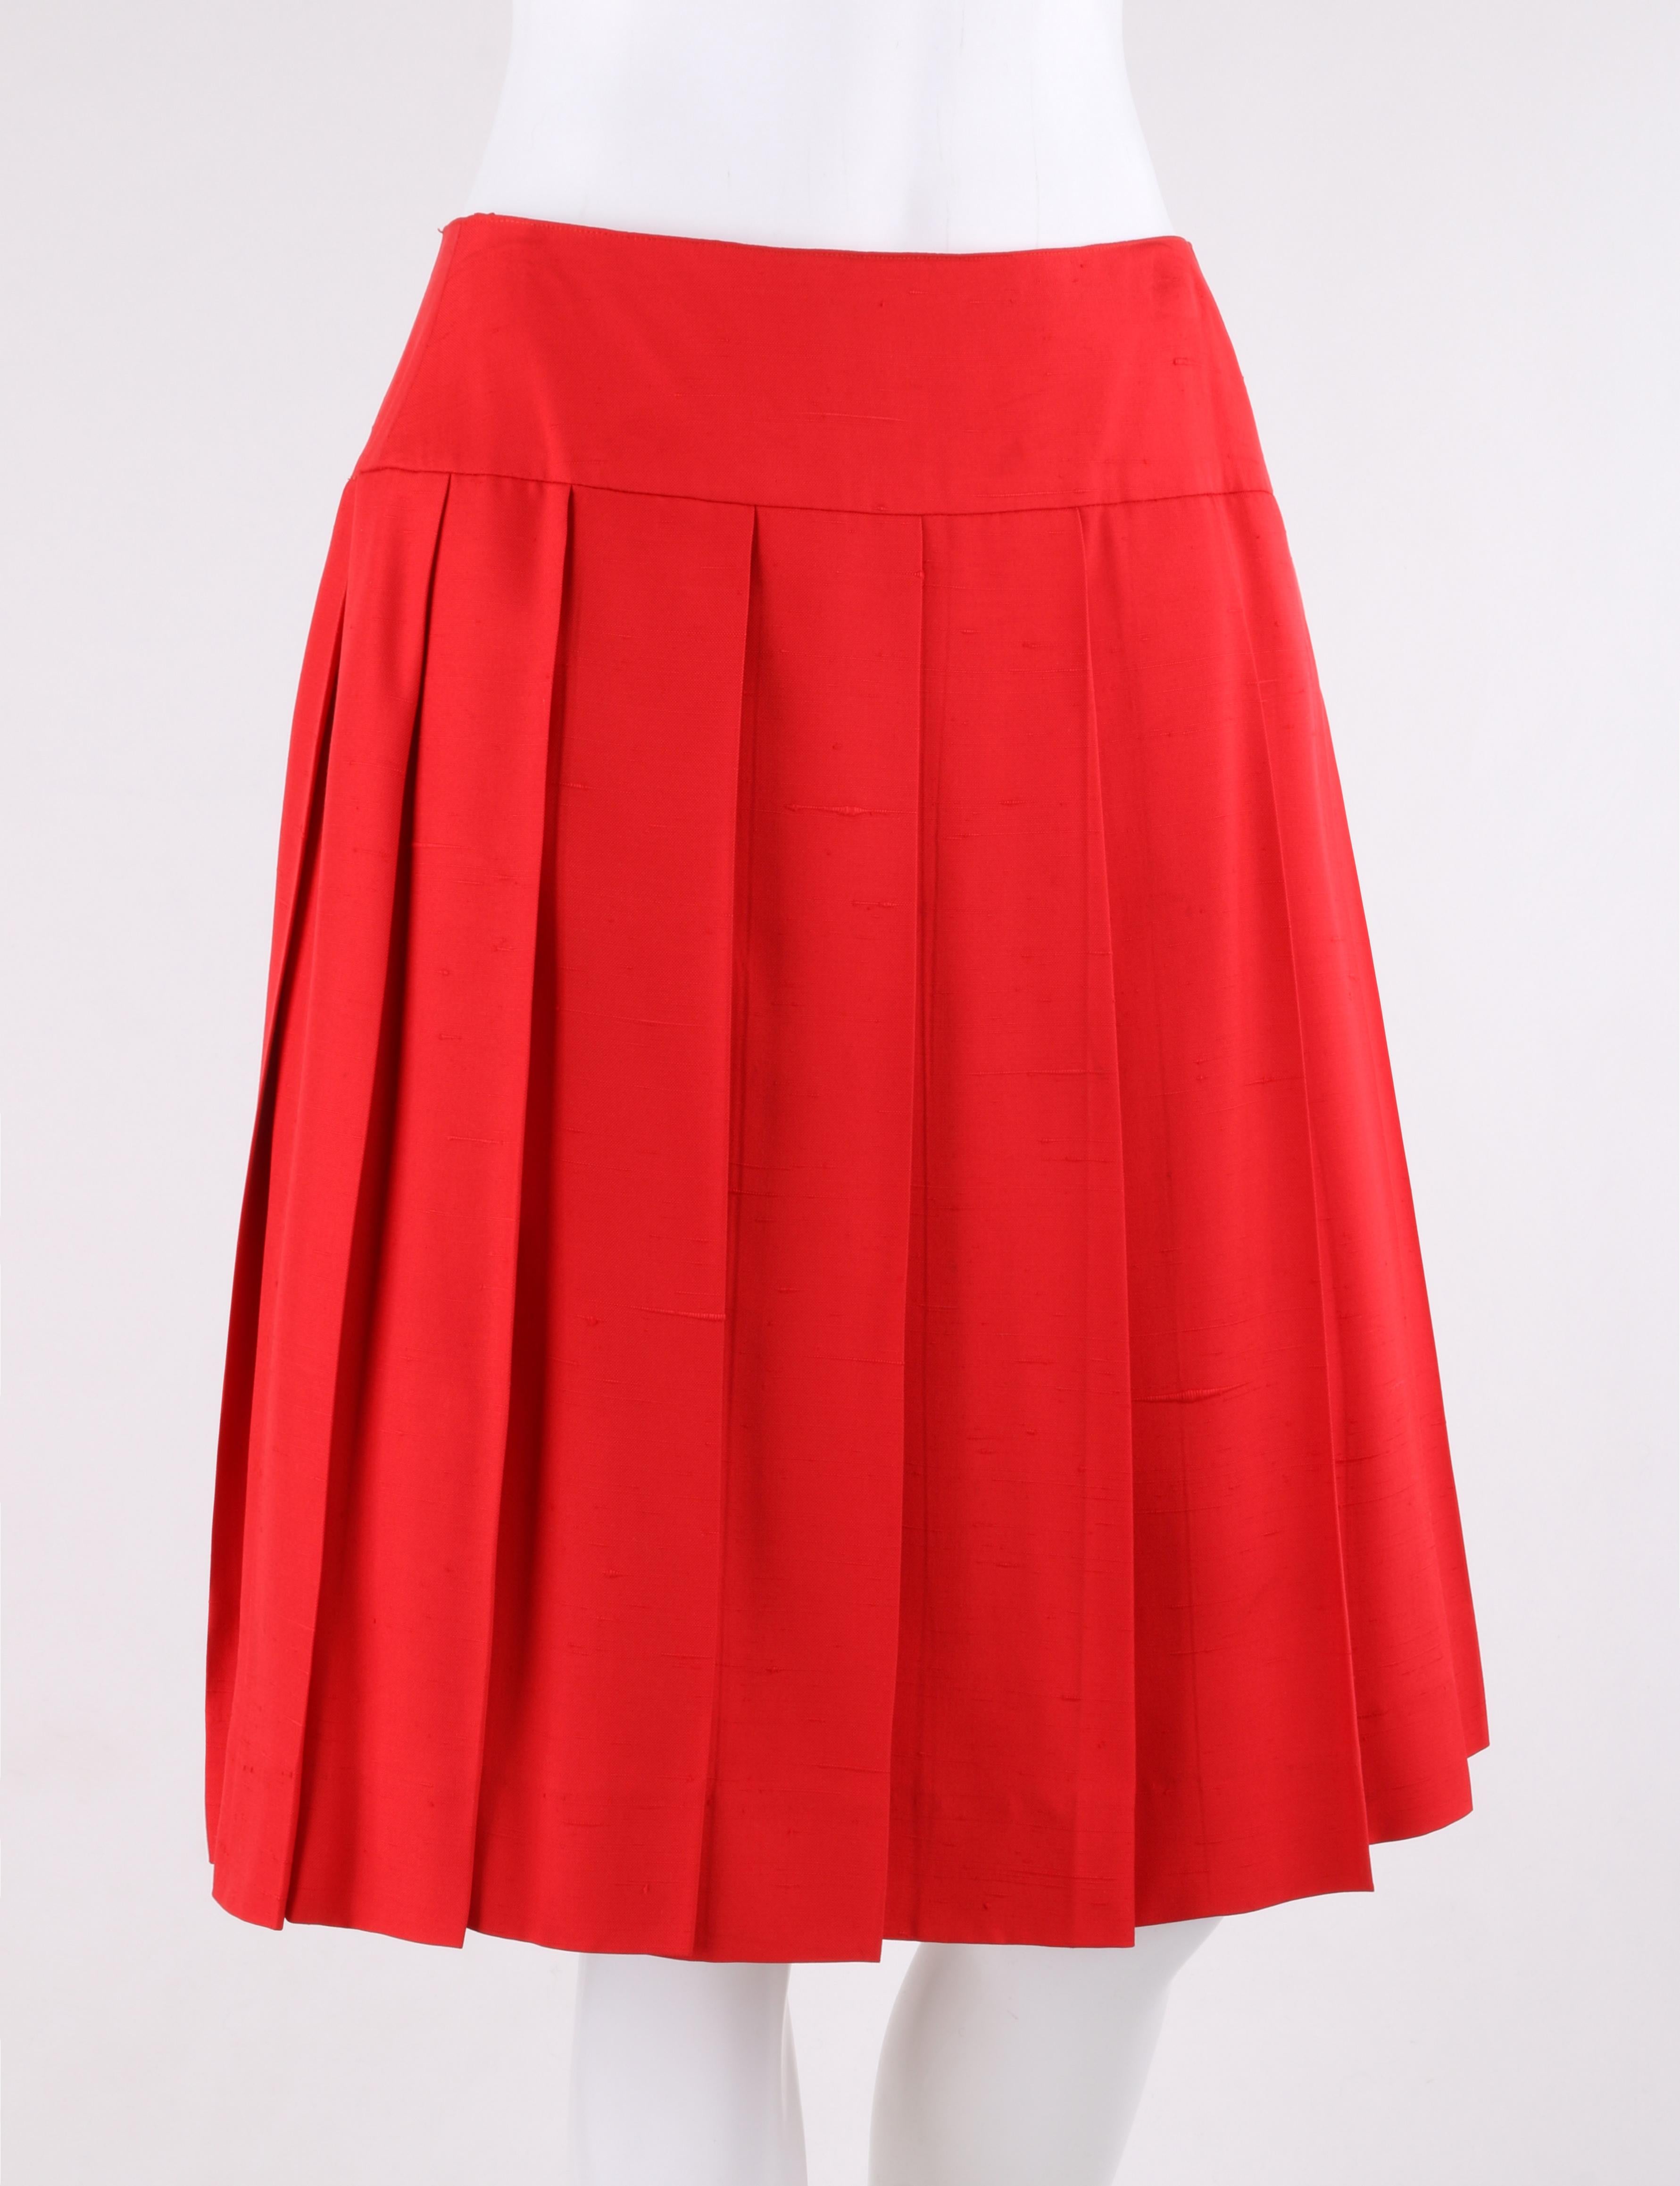 CHANEL c.1980’s Red Silk Classic Pleated Skirt  
 
Circa: 1980’s
Label(s): Chanel Boutique  
Style: Circular, pleated skirt
Color(s): Red
Lined: Yes
Unmarked Fabric Content: Silk
Additional Details / Inclusions: Red knife pleated circular skirt;